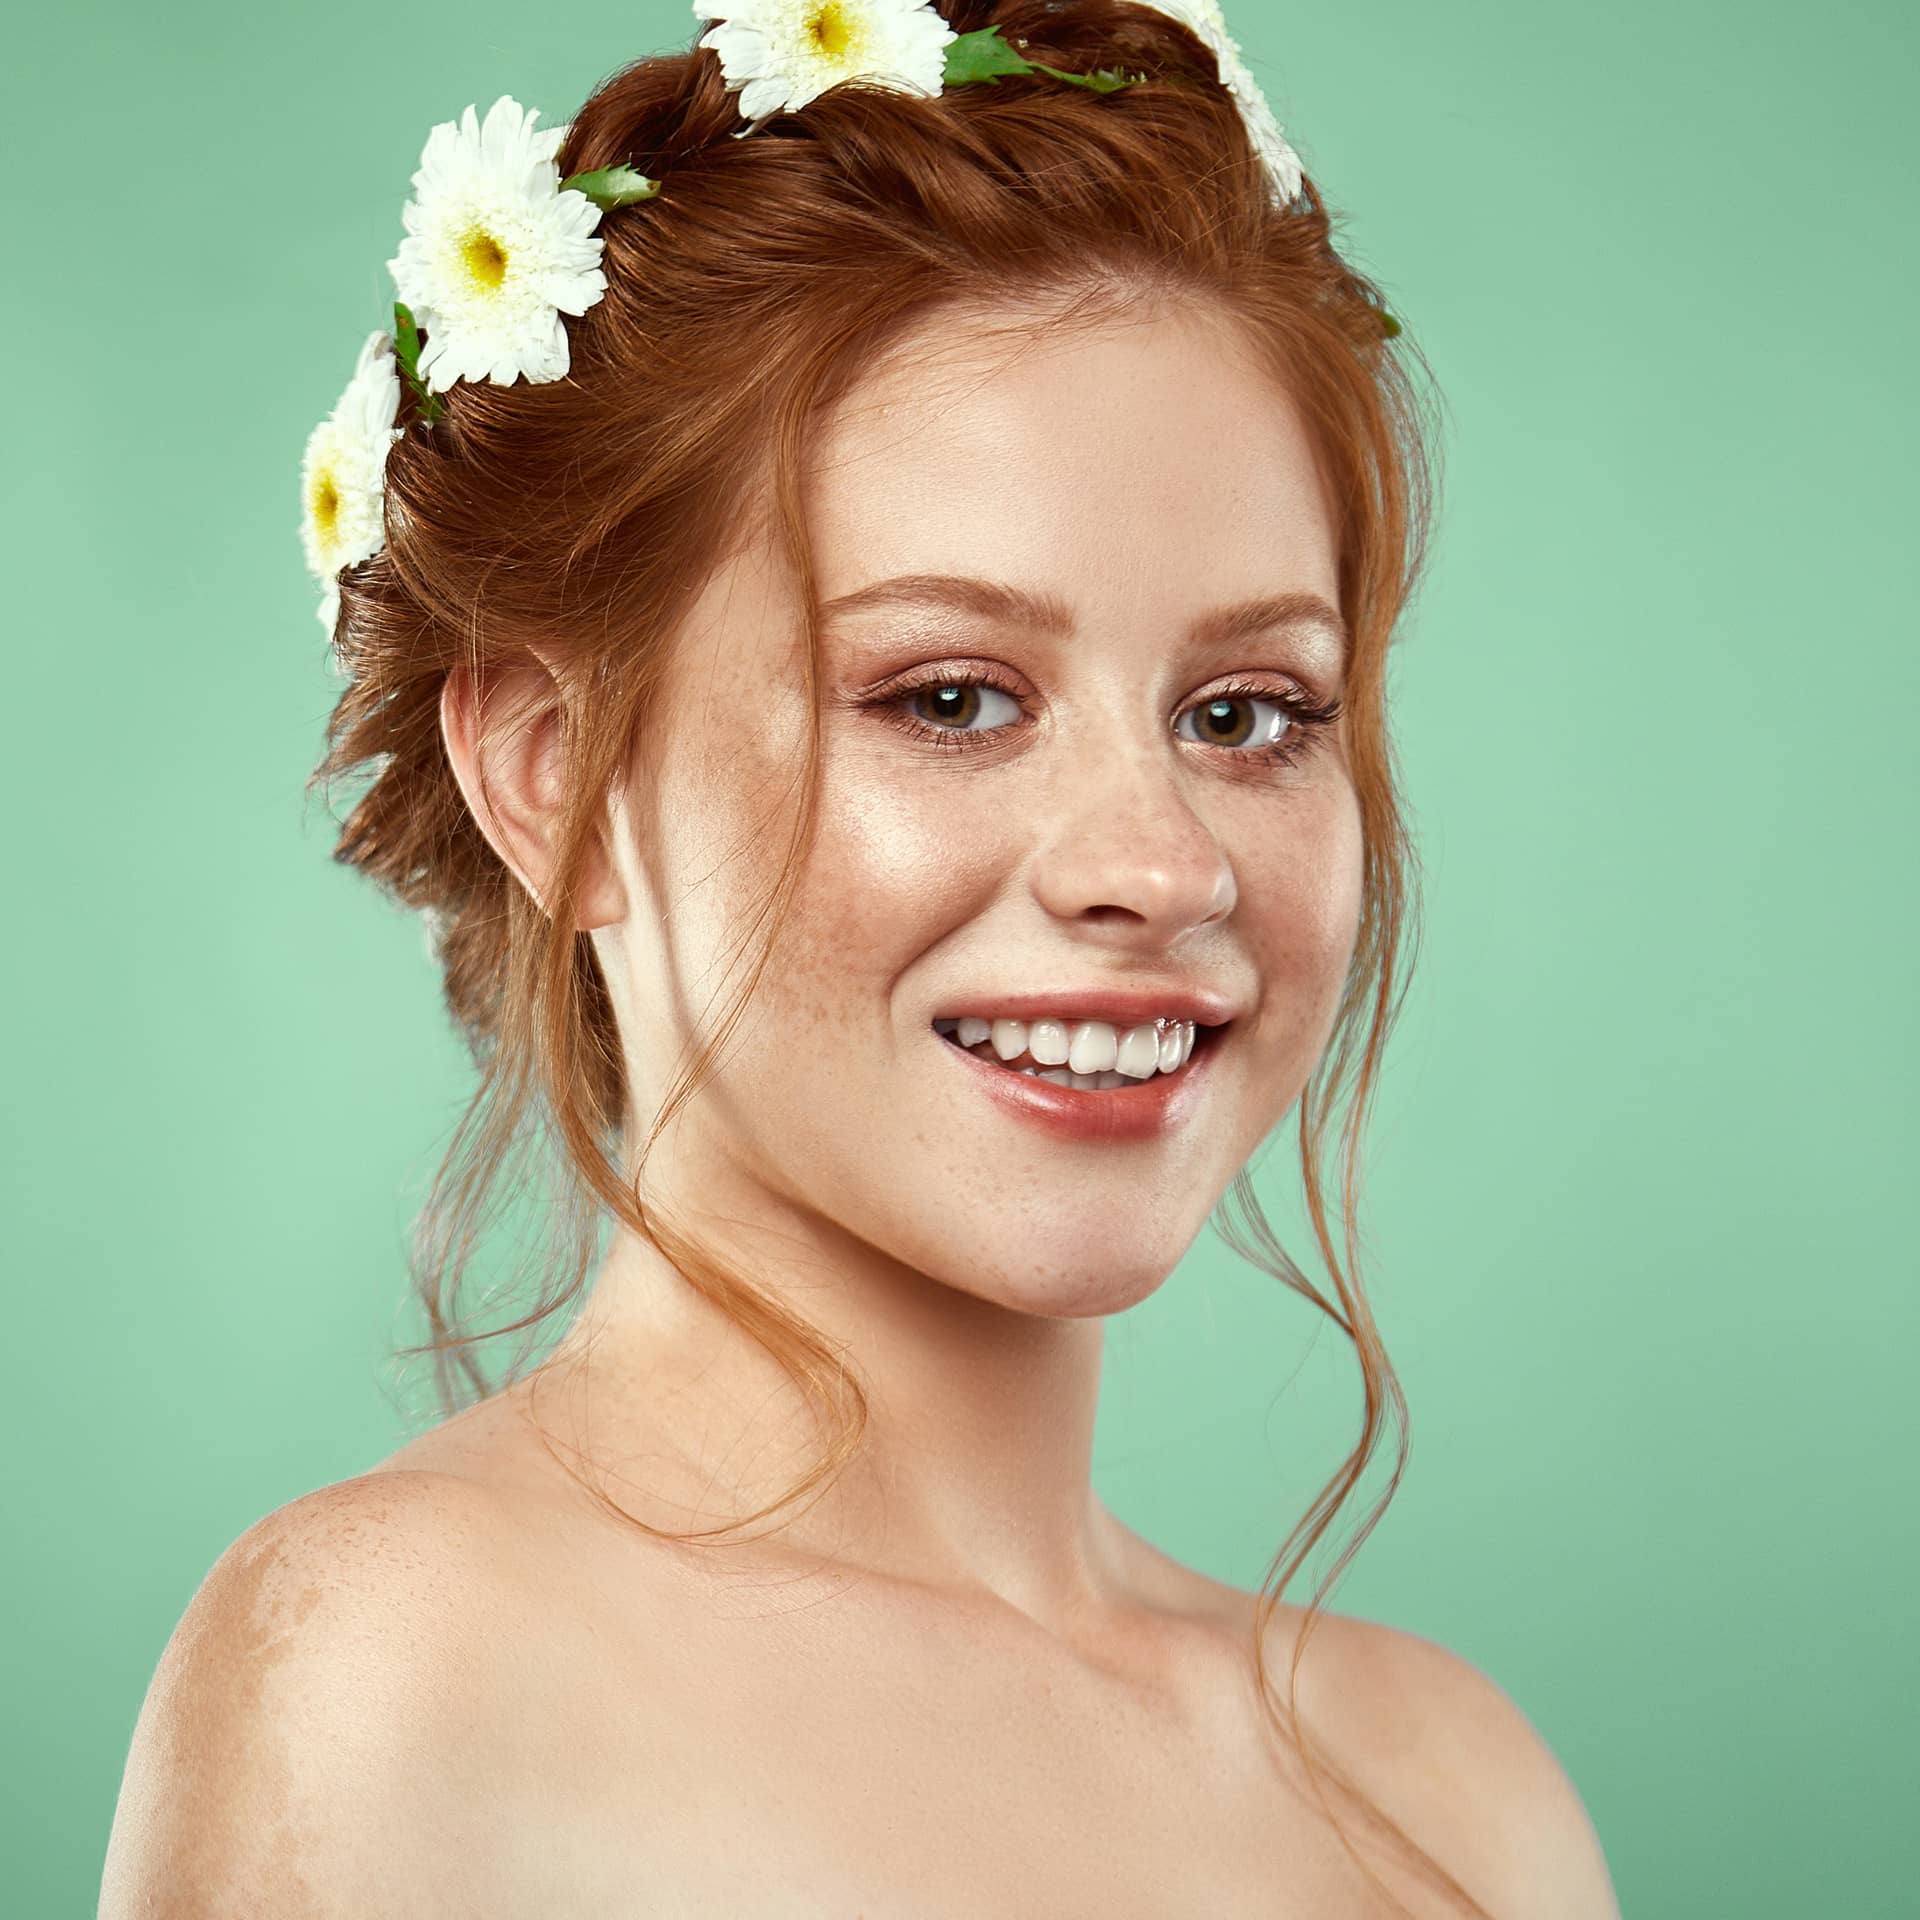 Female profile picture beautiful positive redheaded girl with chamomile crown her head